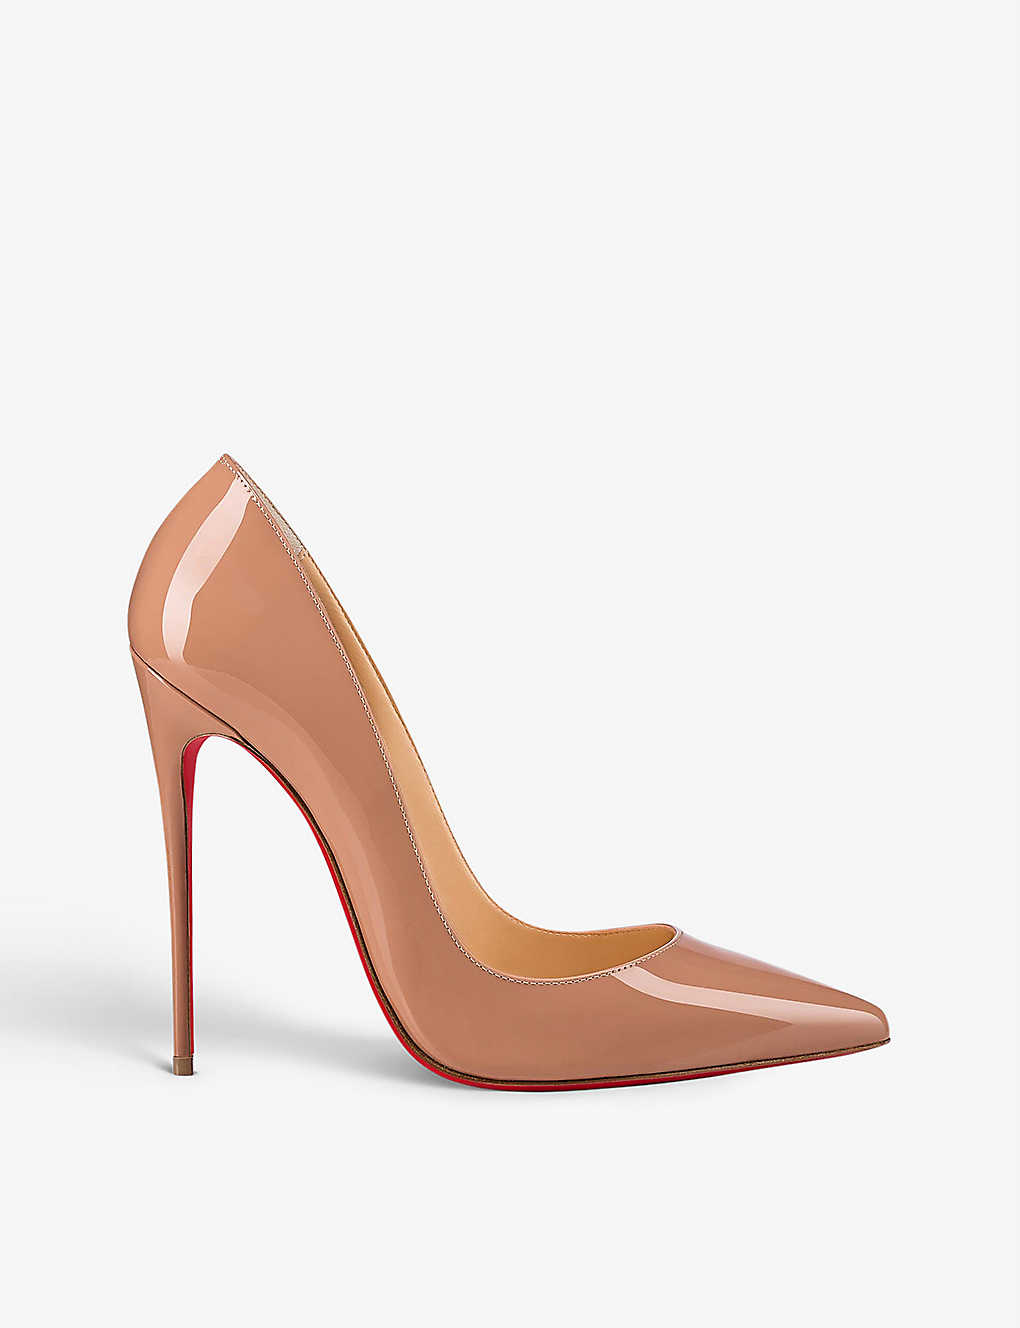 Shop Christian Louboutin Women's Nude So Kate 120 Patent-leather Courts